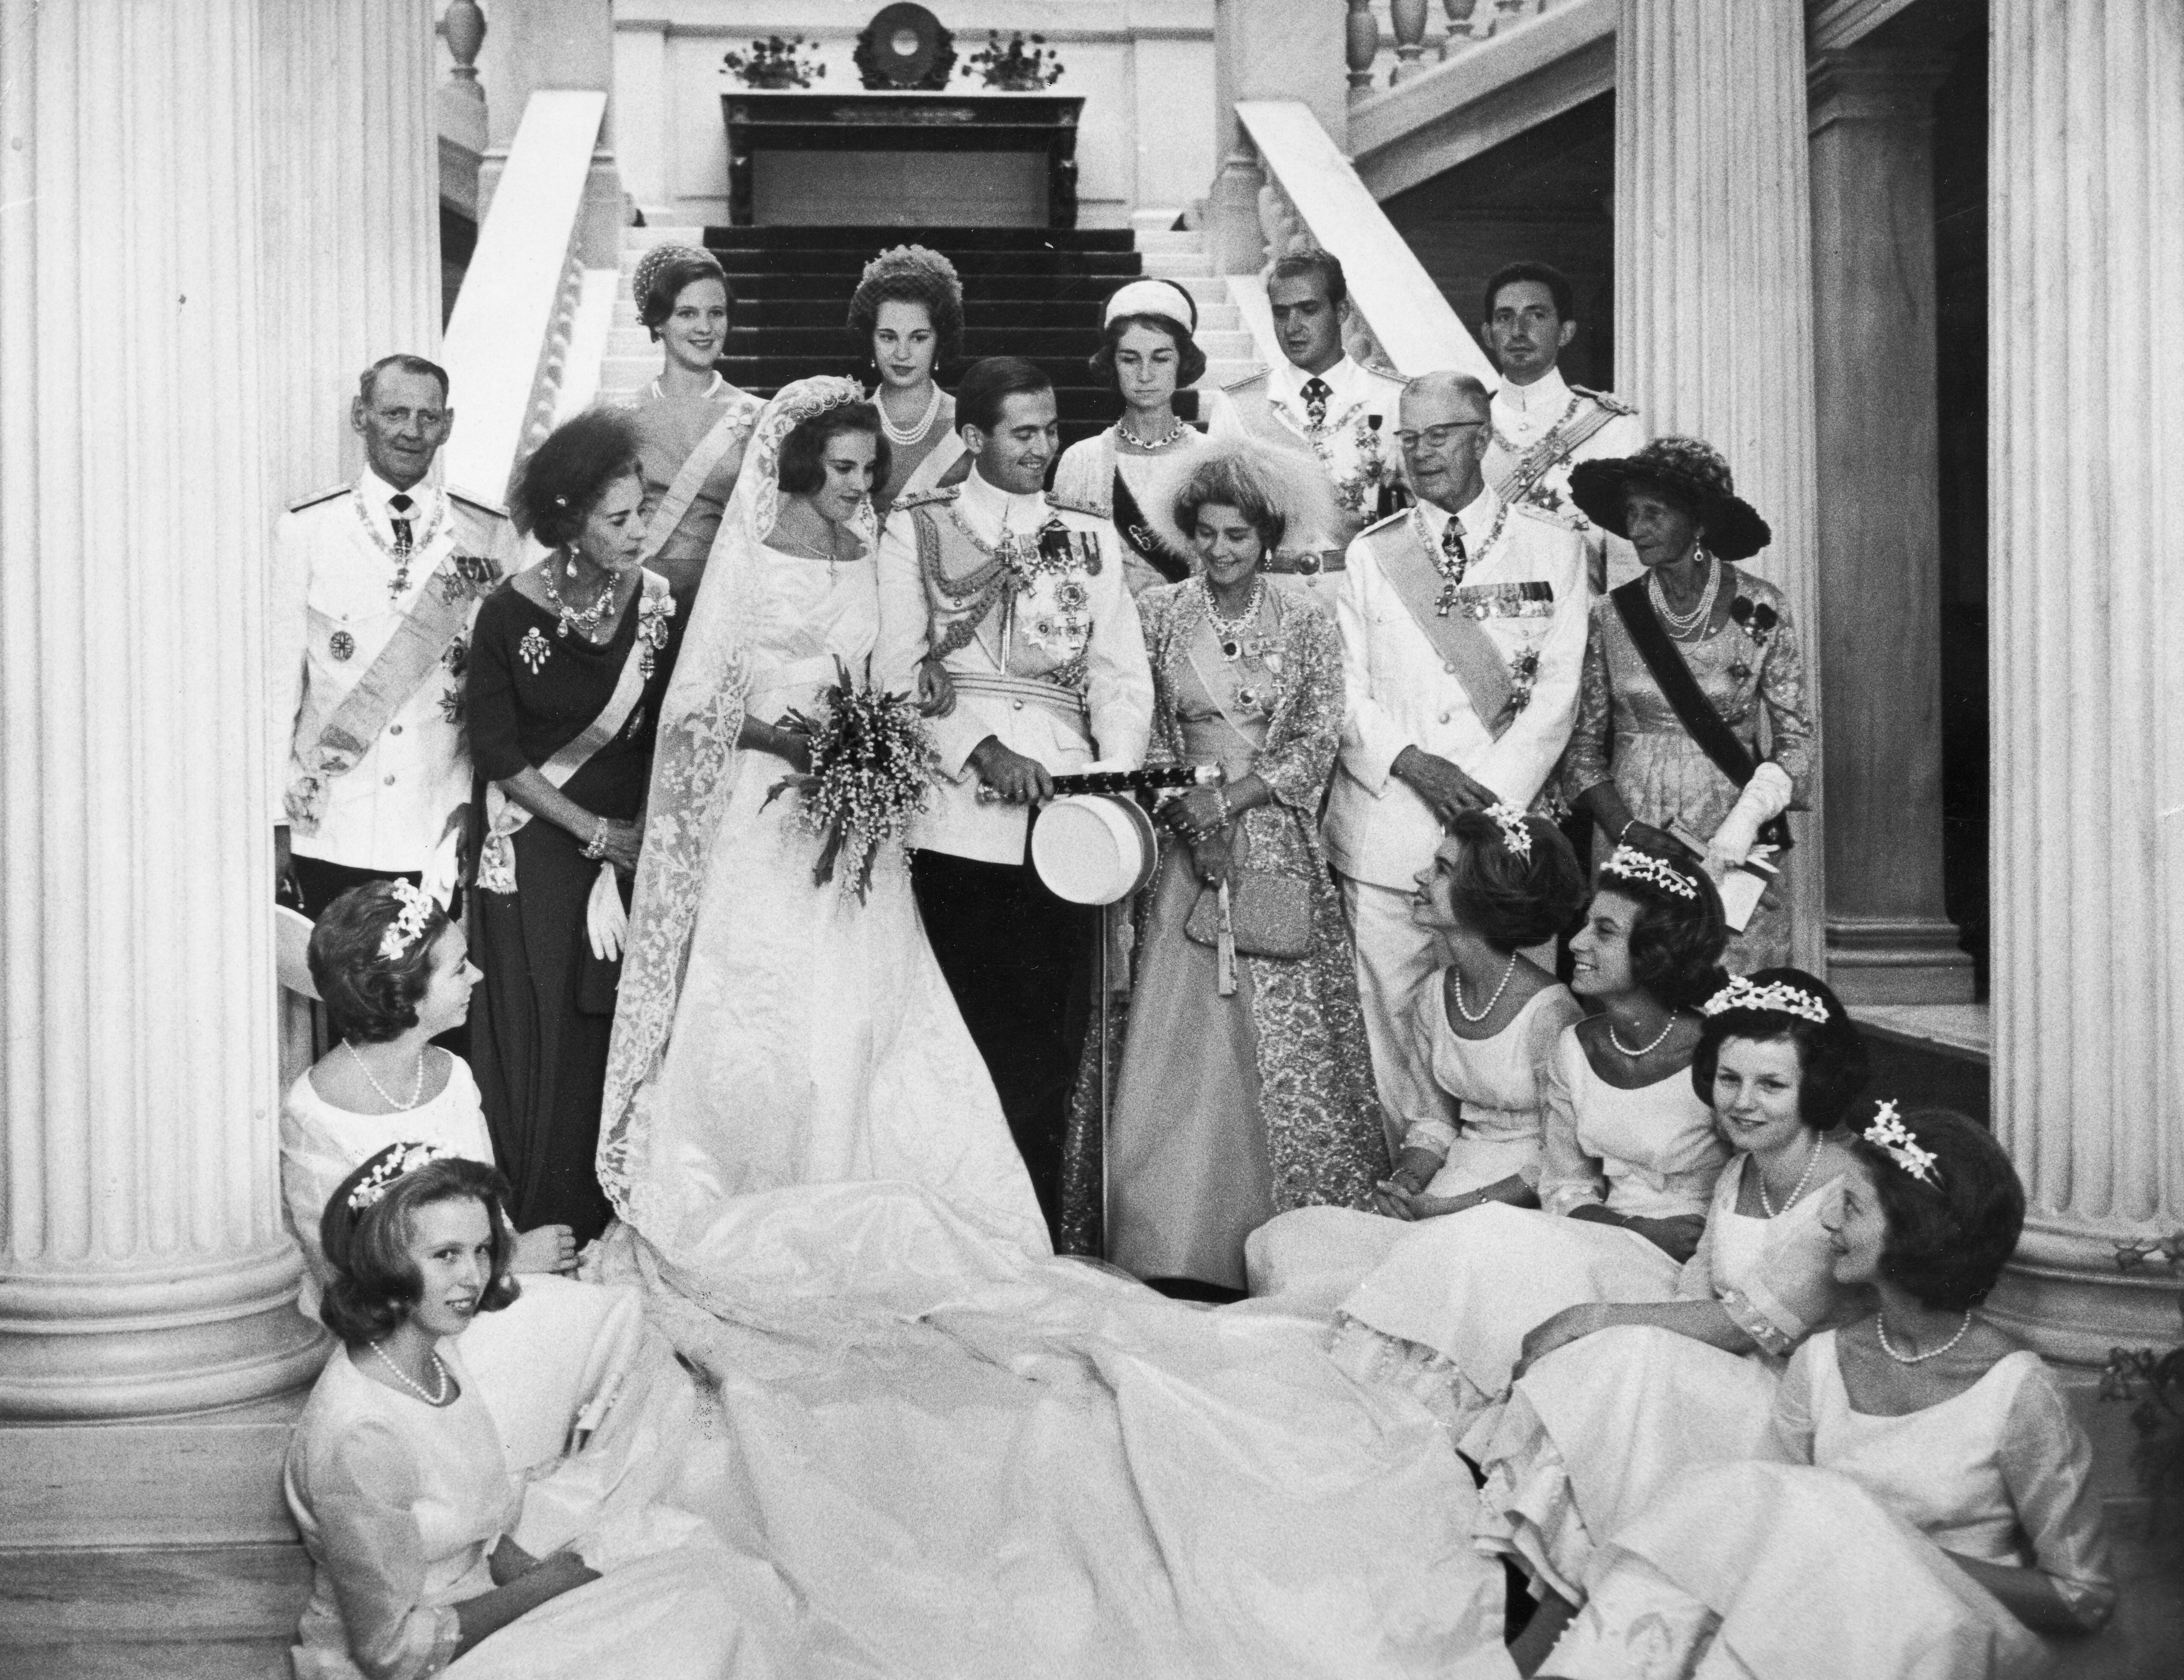 Wedding of King Constantine II and Queen Anne-Marie on September 18, 1964 in Athens.  From left in the top row of the bridal maidens: King Frederick IX of Denmark, Queen Ingrid of Denmark, Queen Anne-Marie of Greece, King Constantine of Greece, Queen Frederick of Greece and King Gustaf VI of Sweden .  Back row left: Crown Princess Margaret of Denmark.  Ritzau Scanpix 2023/Vagn Hansen via REUTERS